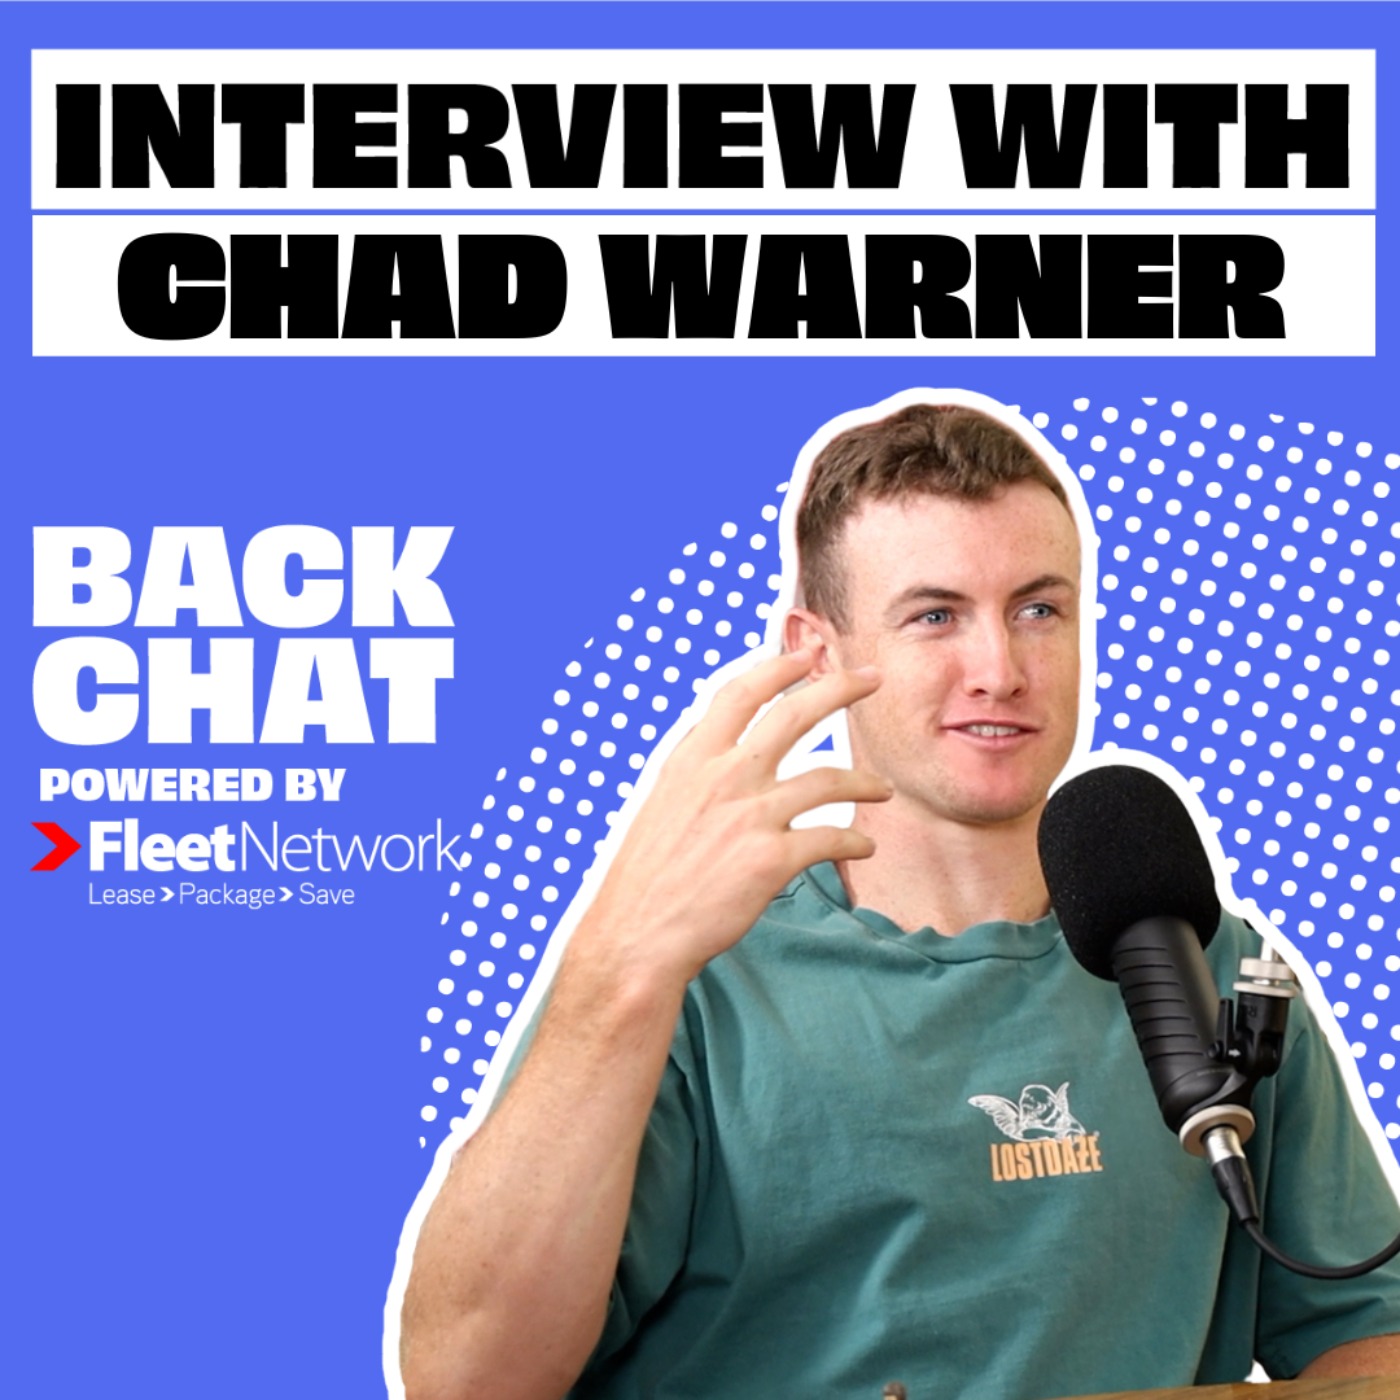 BackChat with Chad Warner